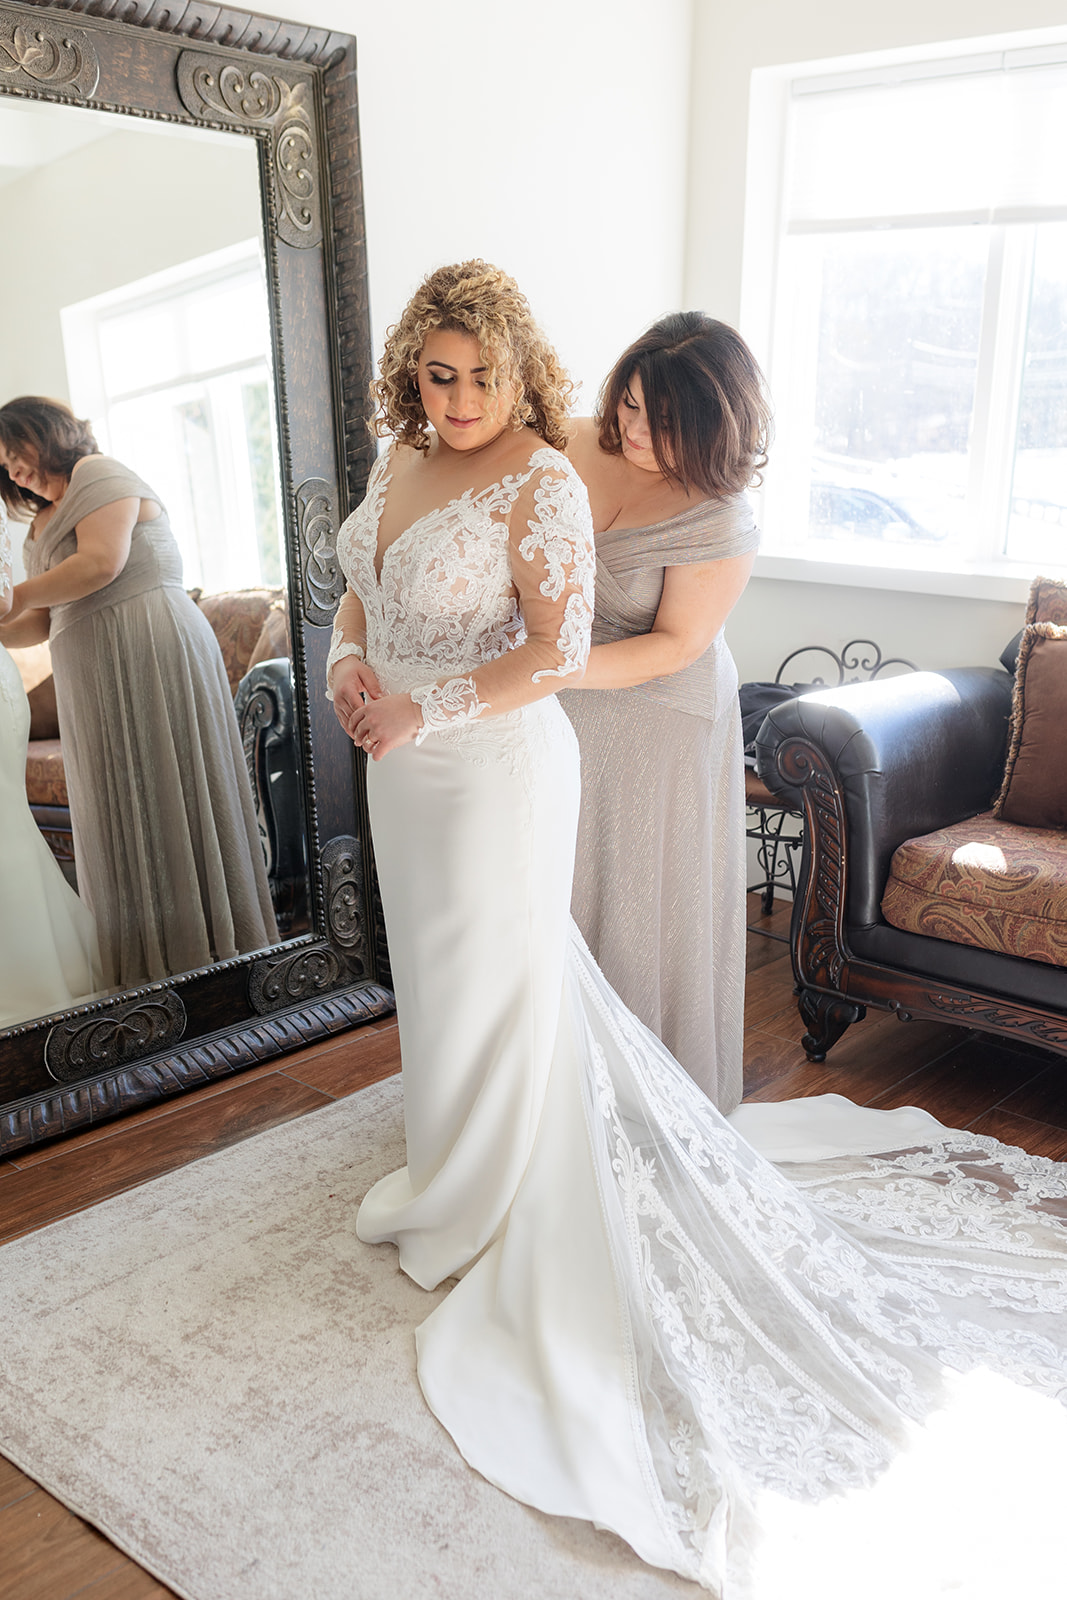 A bride is helped by mom to close up the back of her lace wedding dress in a mirror